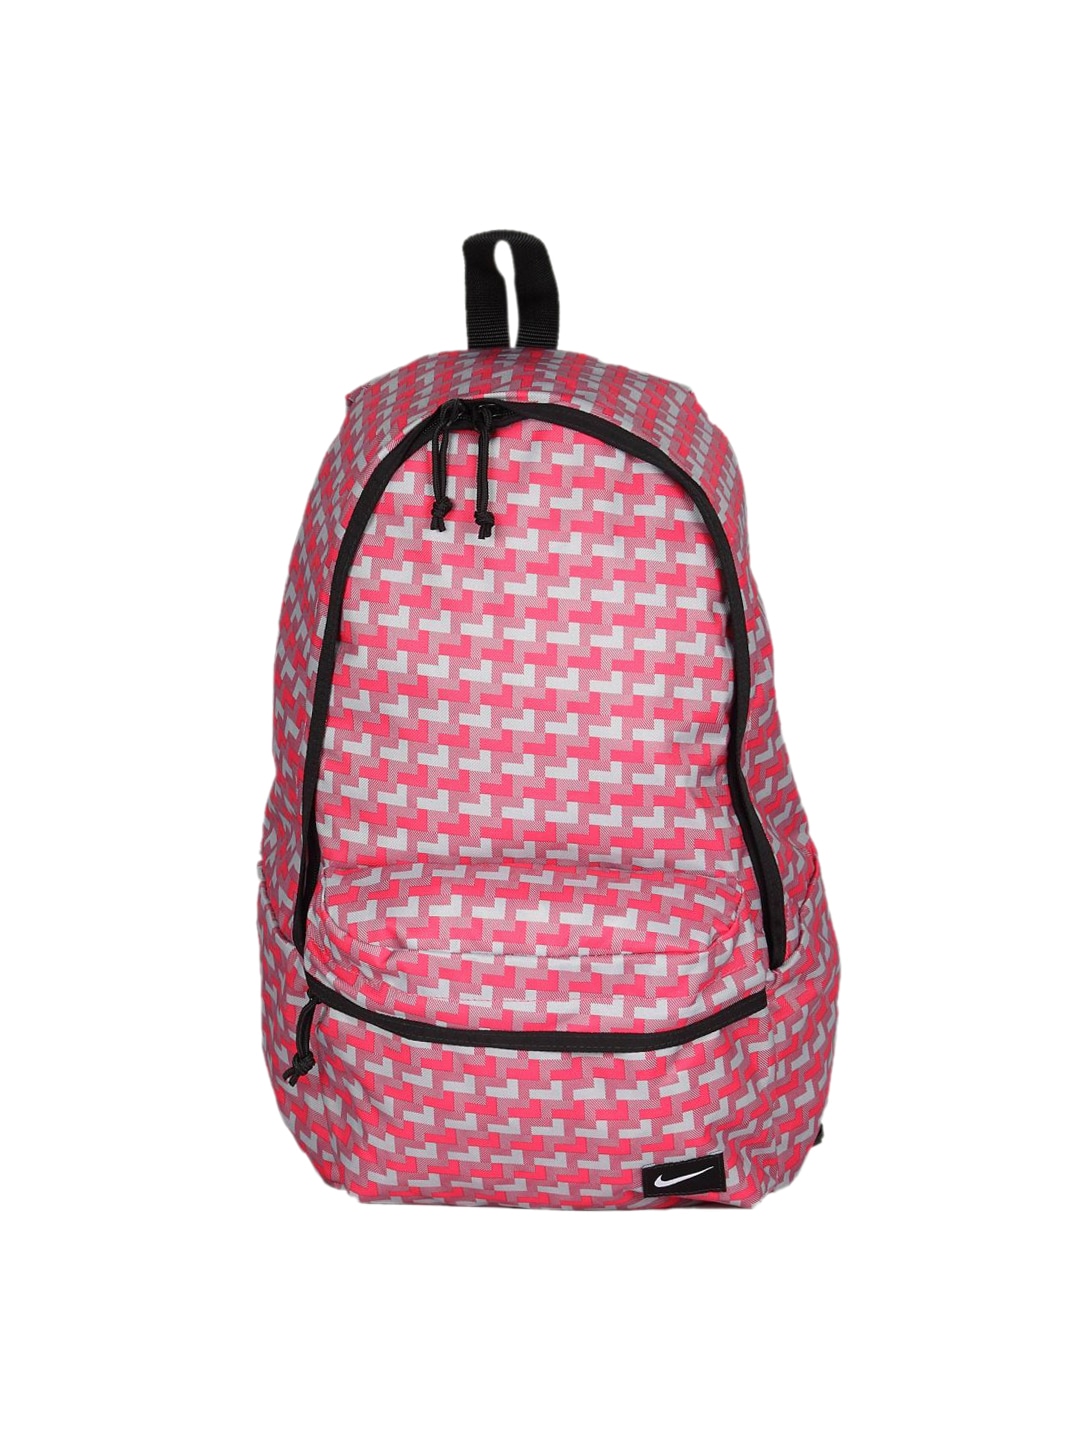 Nike Unisex All Access HA Pink Backpack